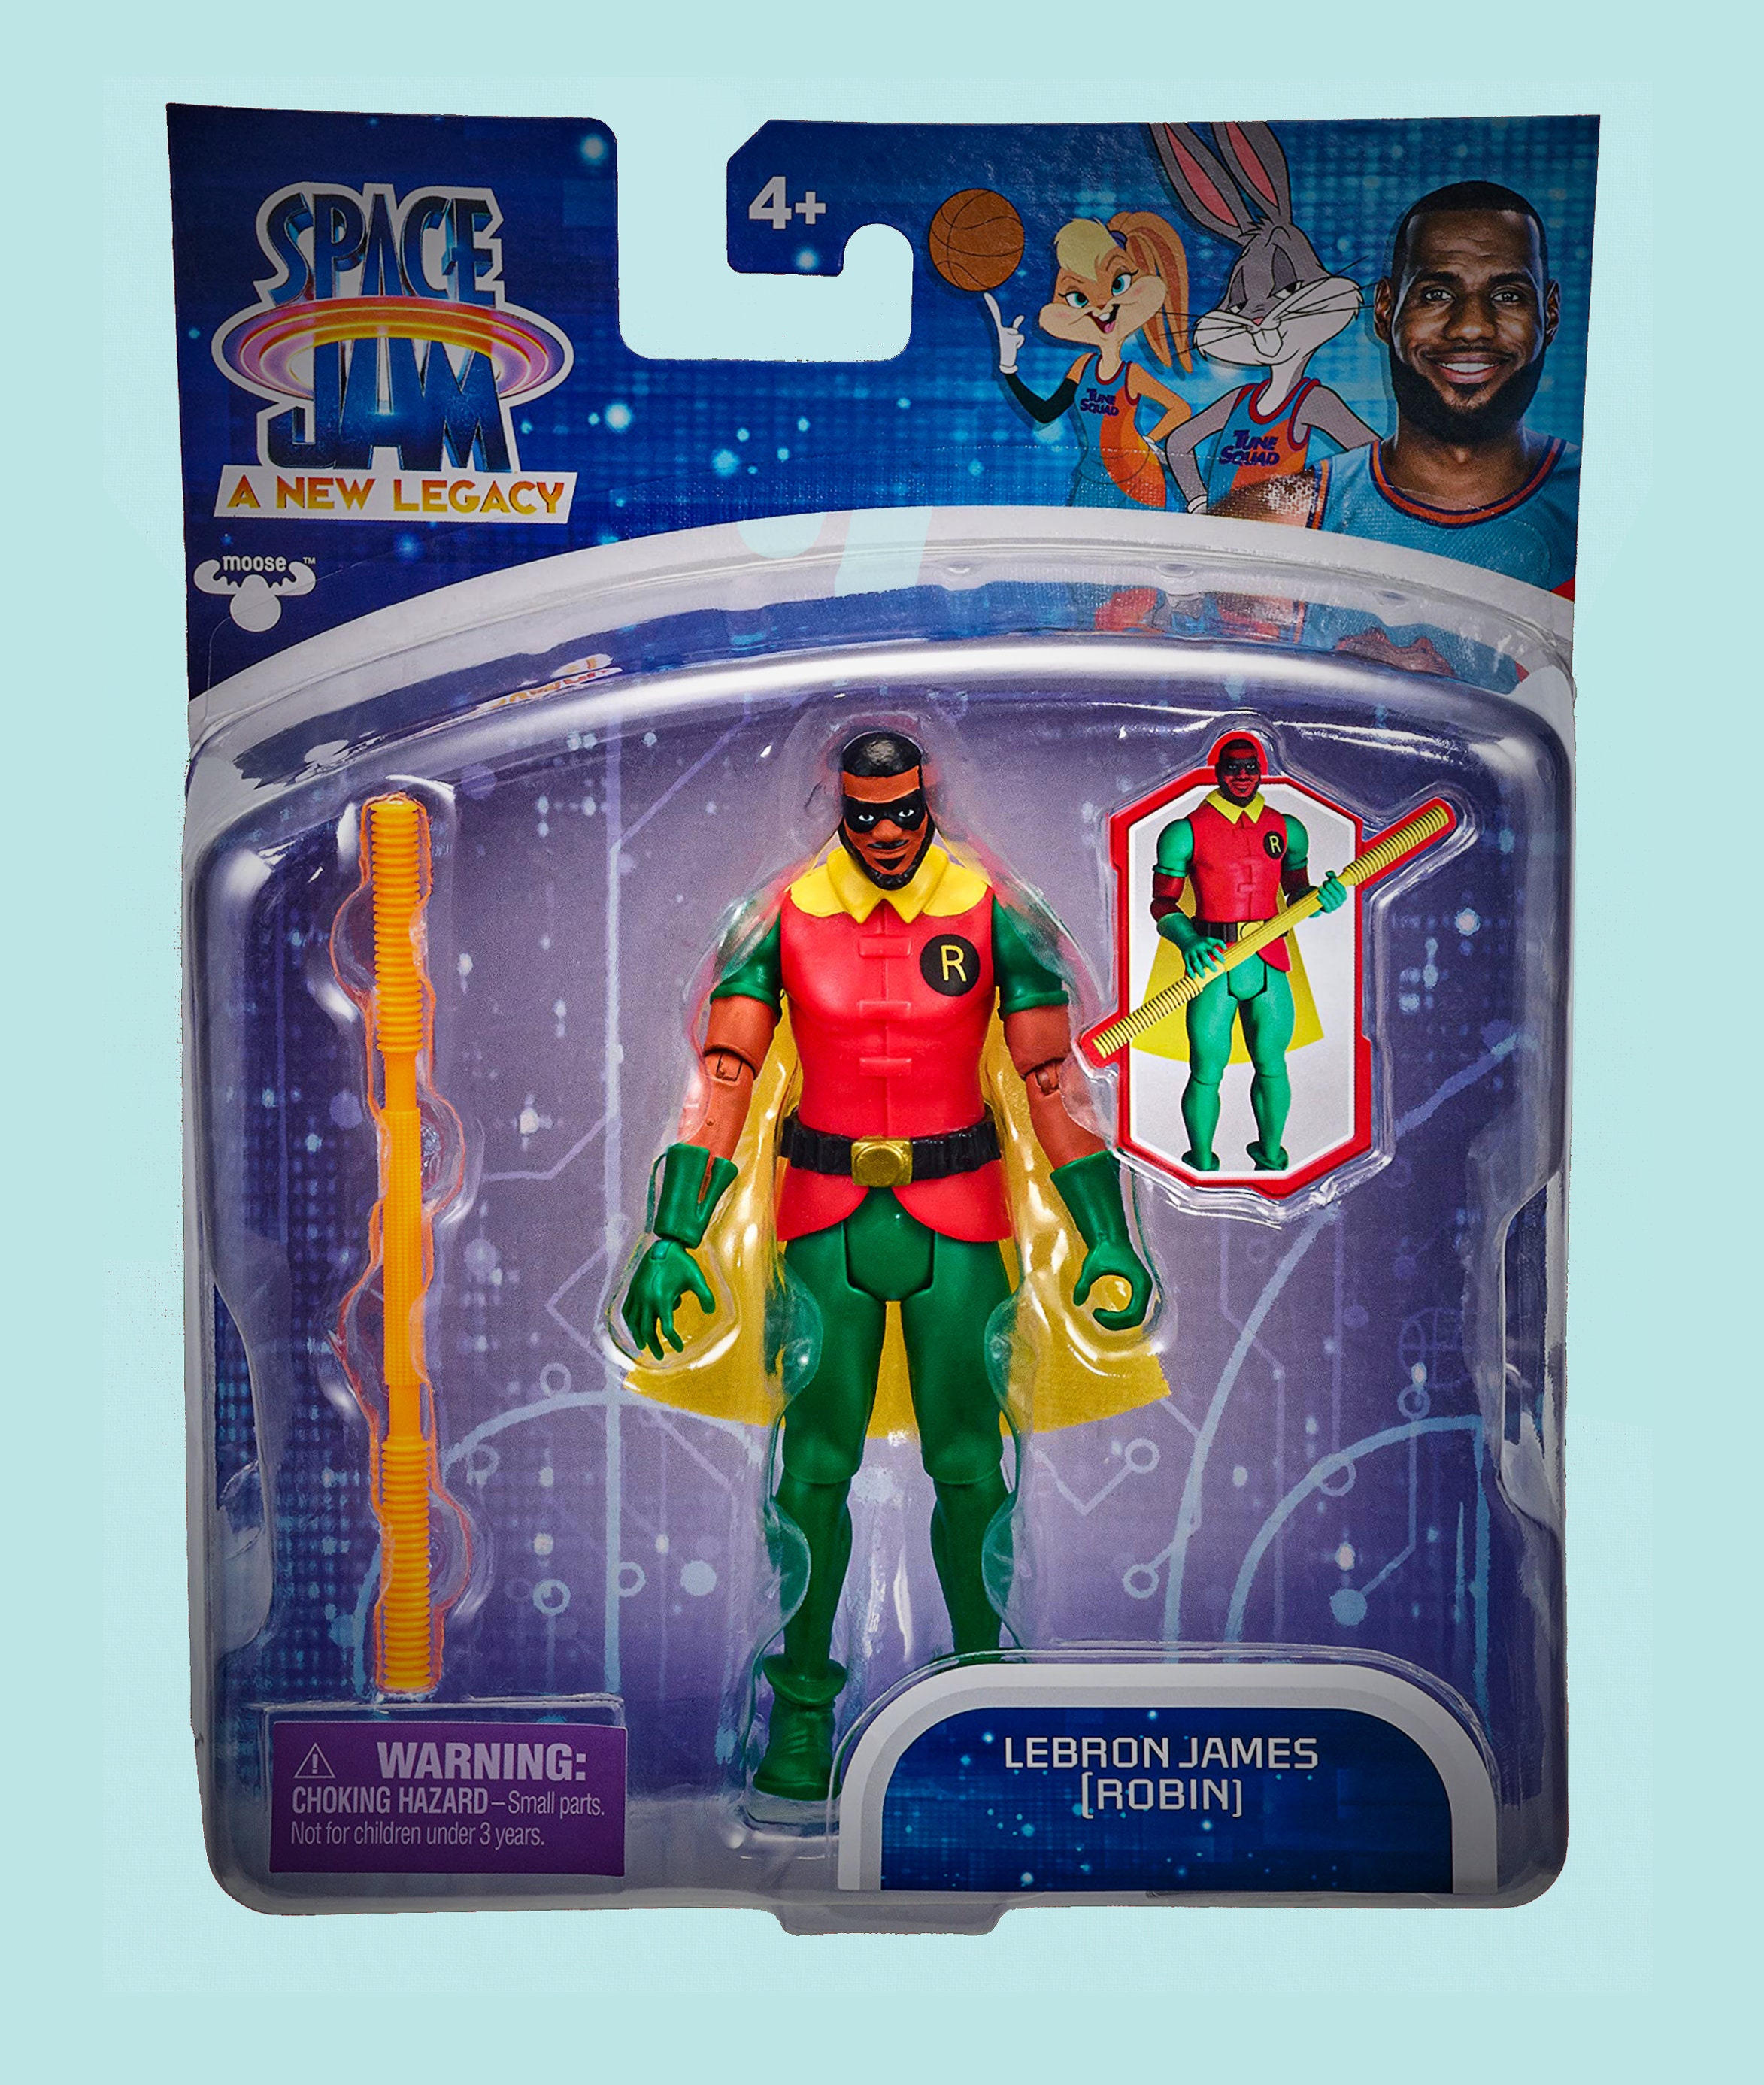 Lebron James: Robin /space Jam A New Legacy 5 Action Figure - Etsy